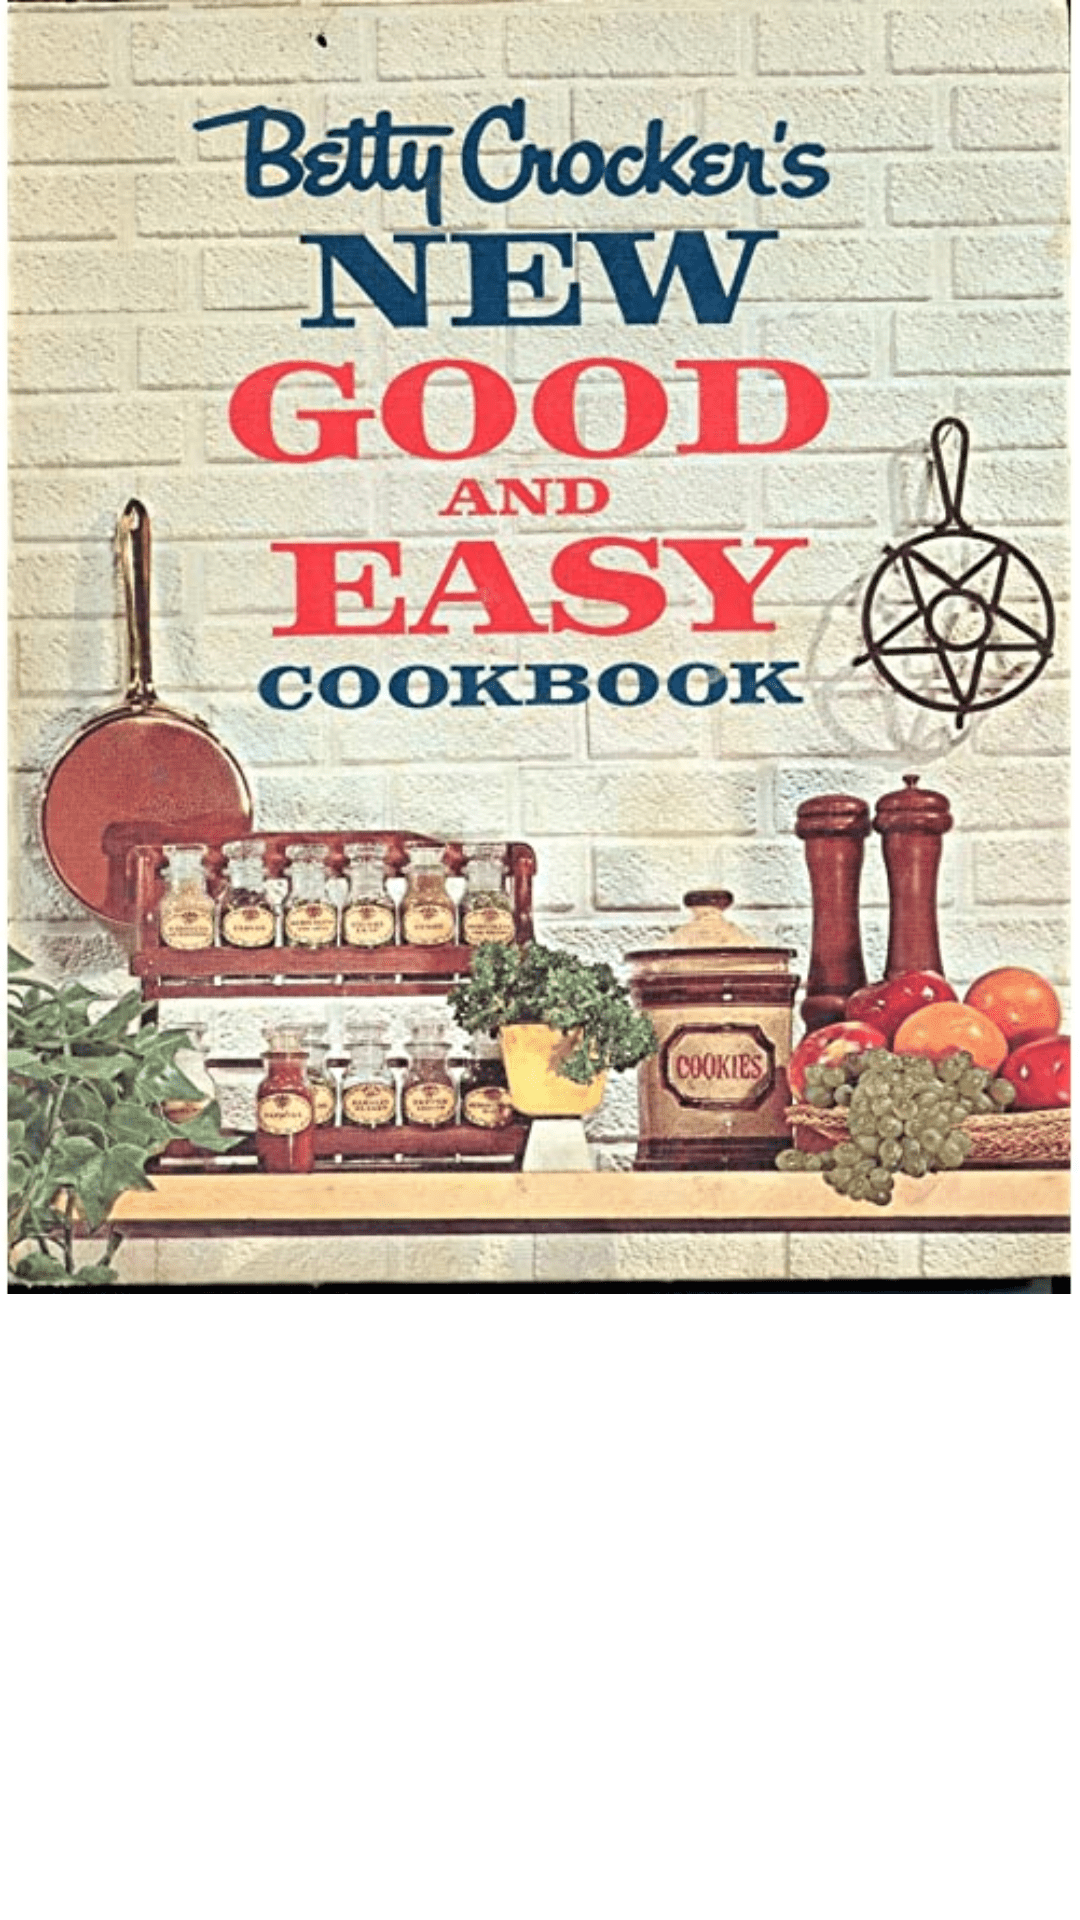 Betty Crocker's New Good and Easy Cookbook